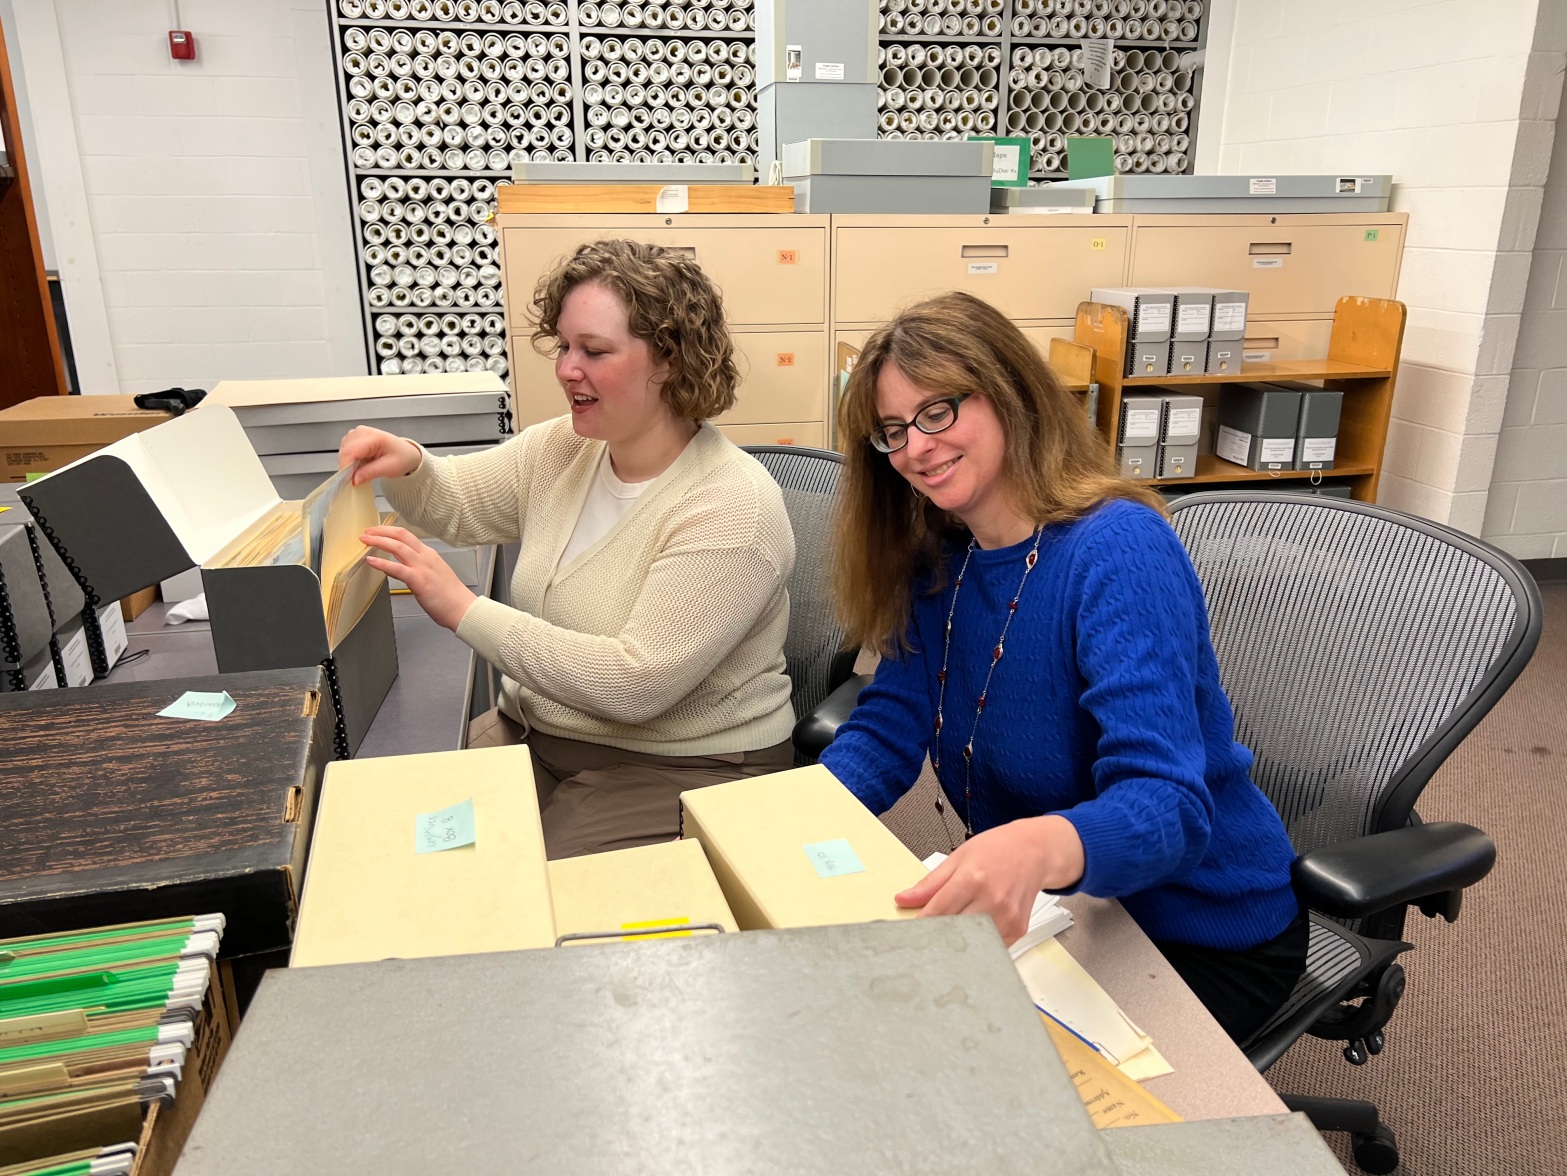 Two women sit at a desk. One is pulling a folder from a document box. The other is looking down at materials on the desk.